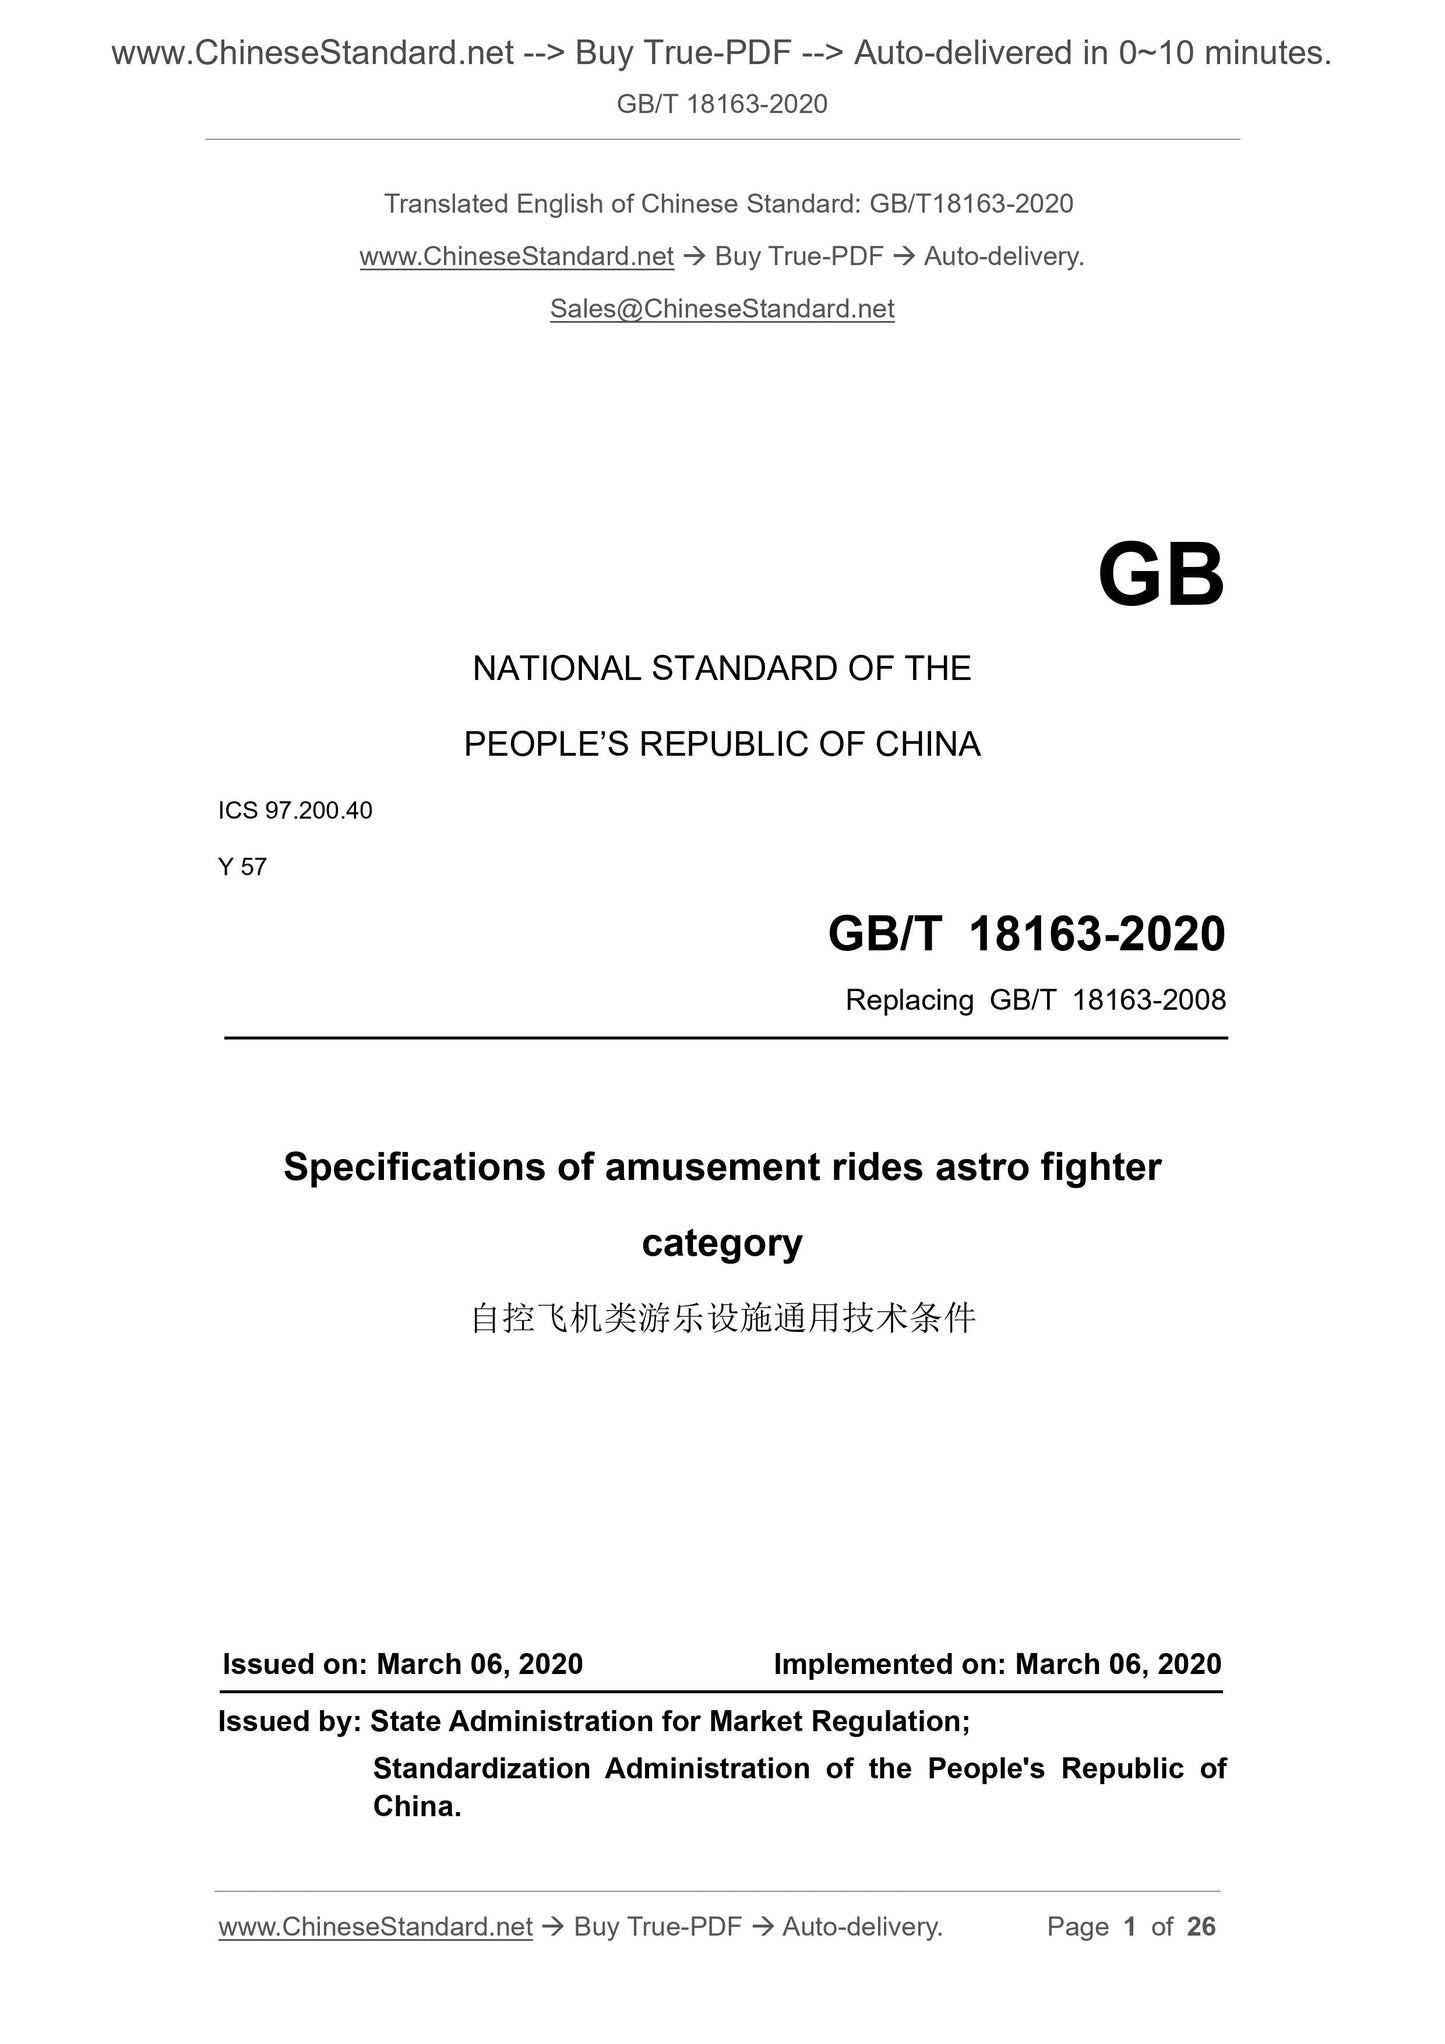 GB/T 18163-2020 Page 1